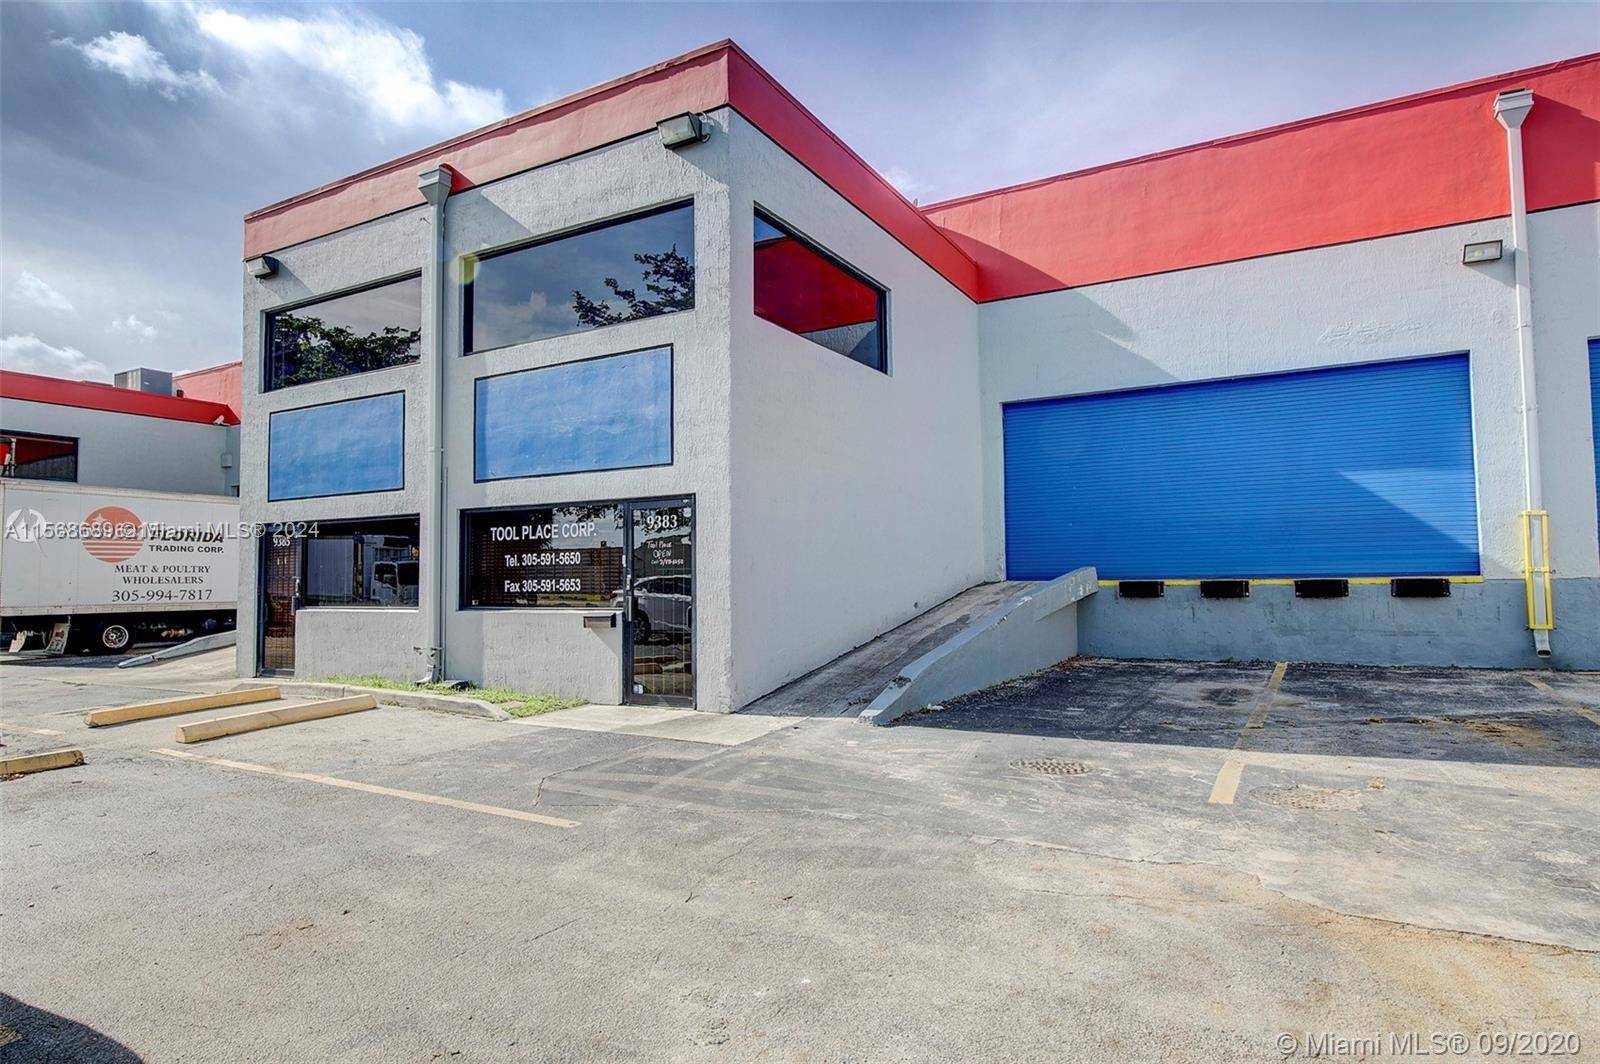 9383 9385 Two Dock High Warehouses combined to a total of 7, 920 SF which includes reception area, private offices, conference room, cubicles, kitchenette and 4 bathrooms.